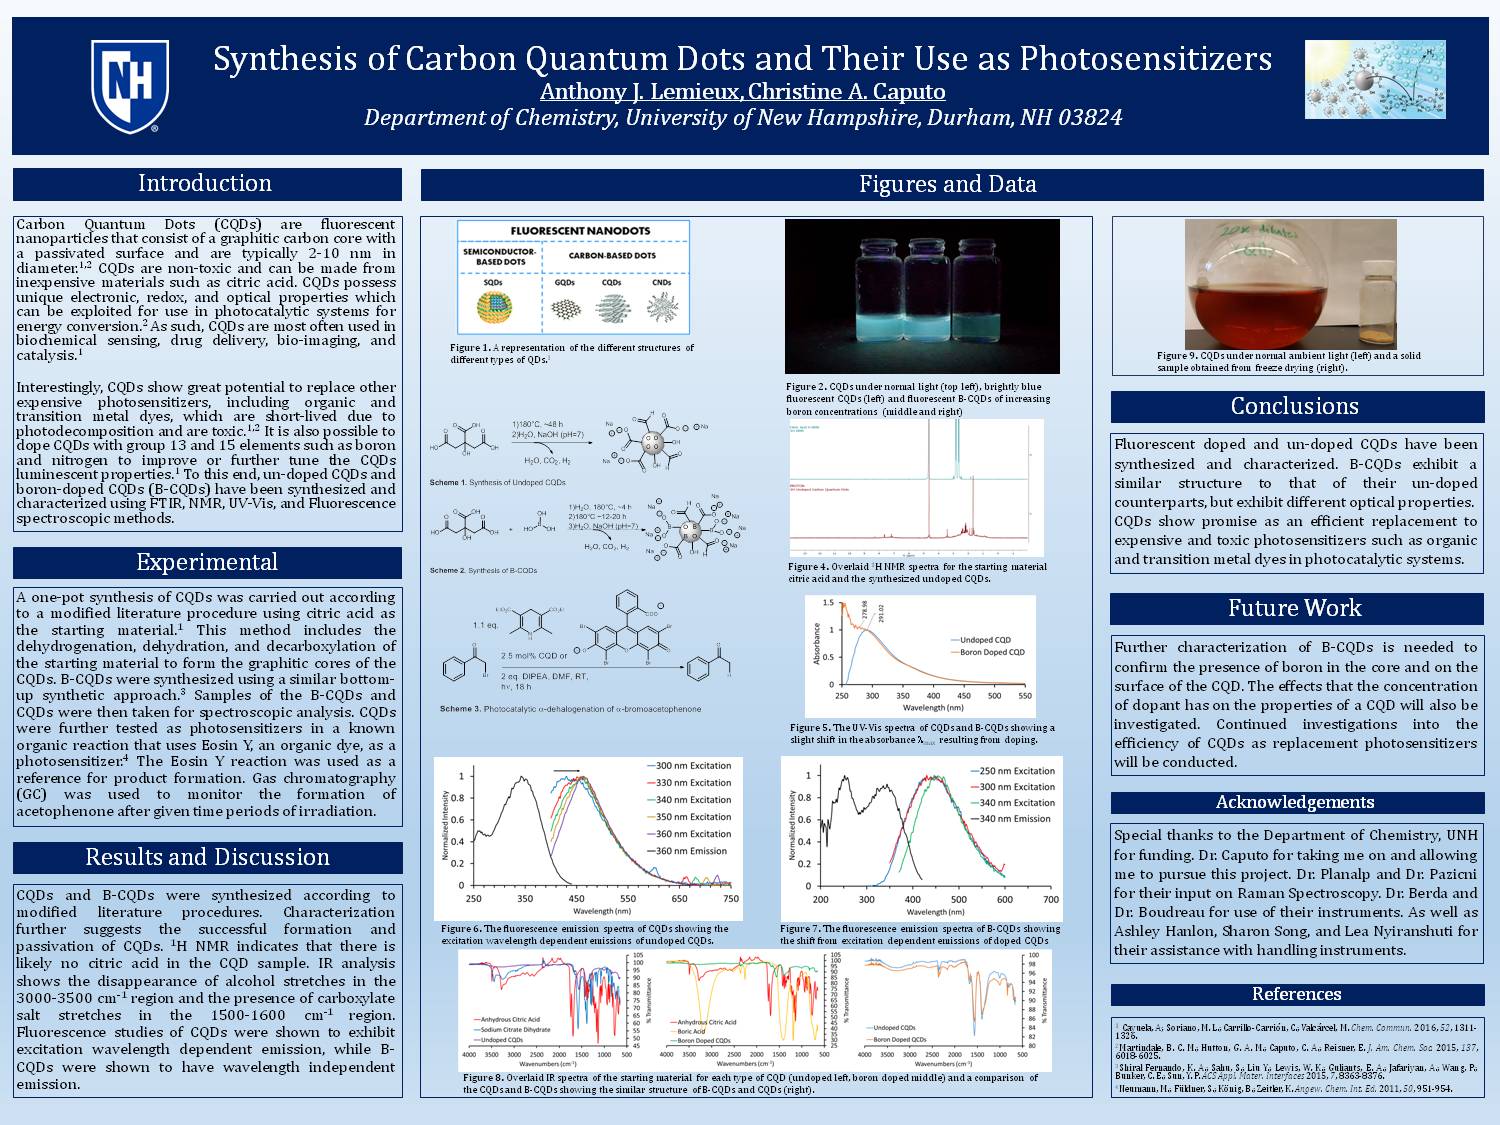 Synthesis Of Carbon Quantum Dots And Their Use As Photosensitizers by Al2007